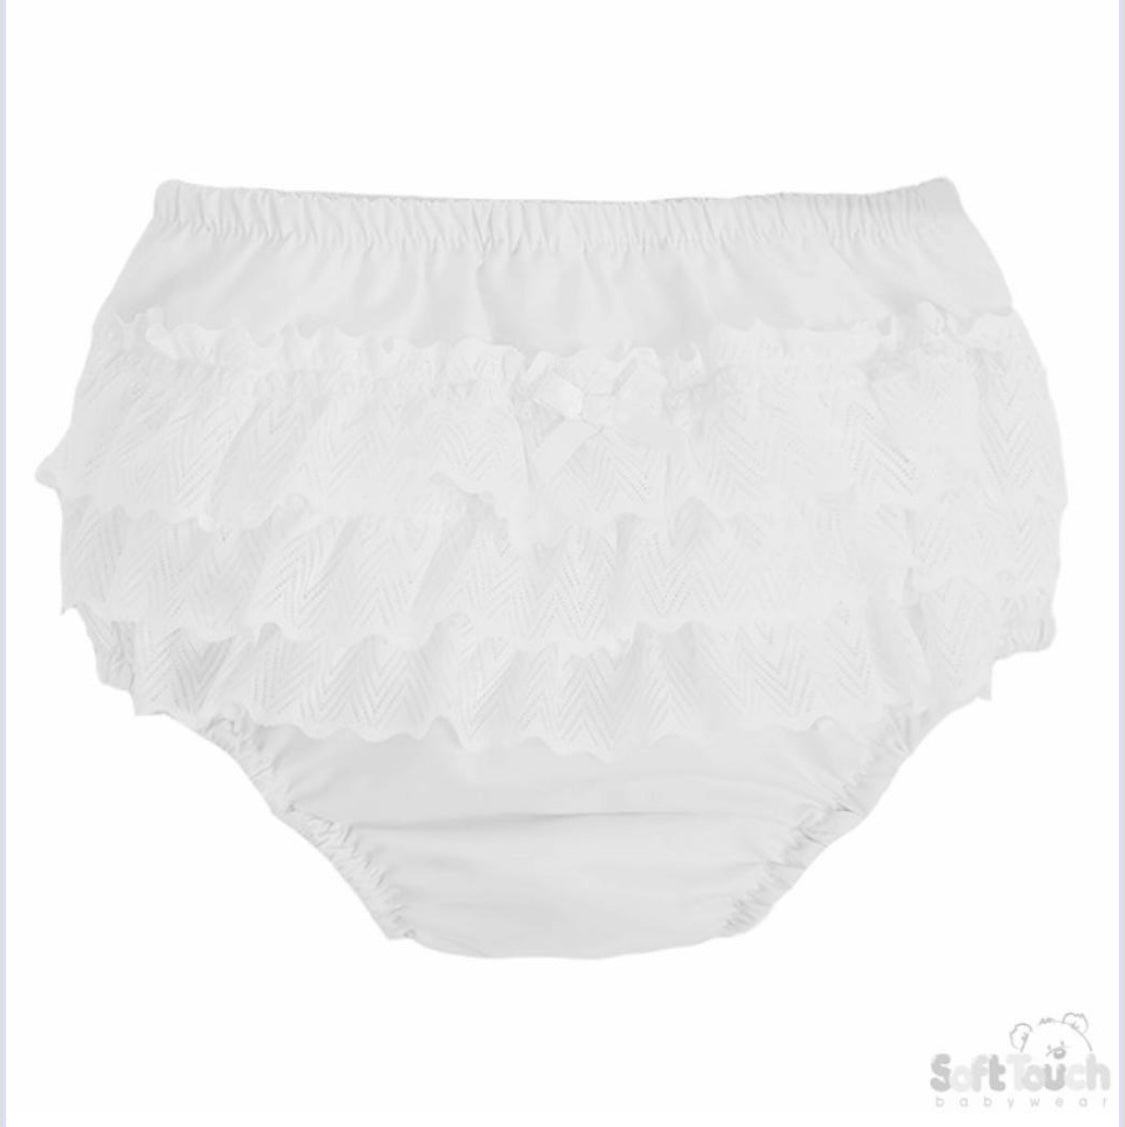 frilly white zigzag lace pants knickers 